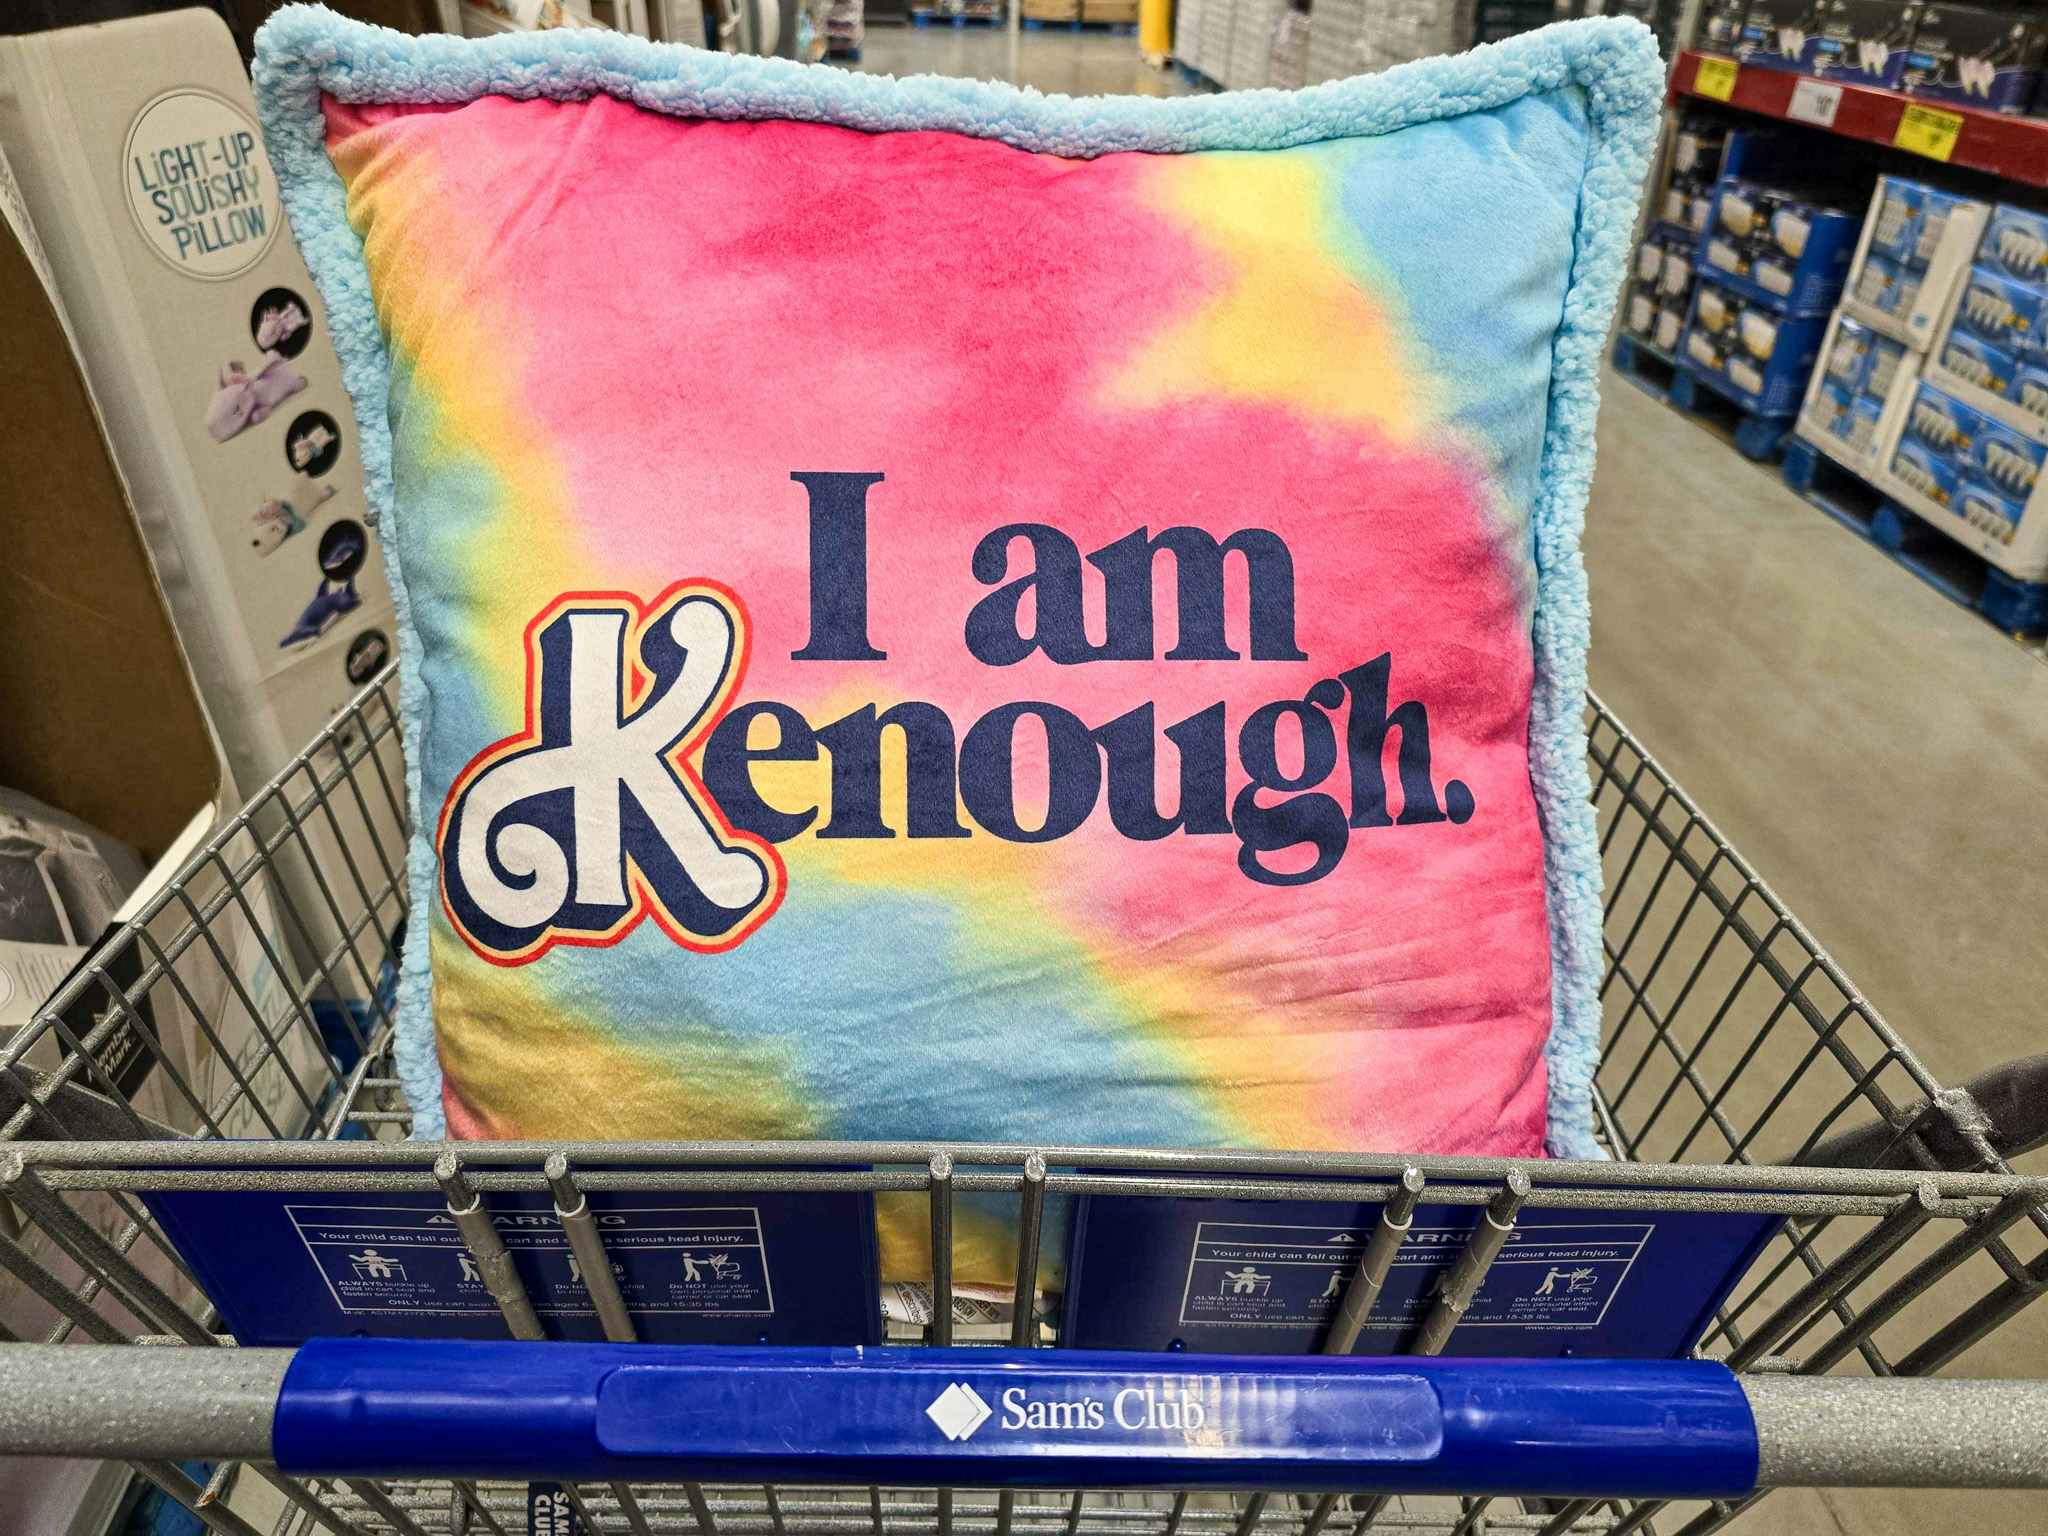 pillow that says "I am Kenough" in a shopping cart